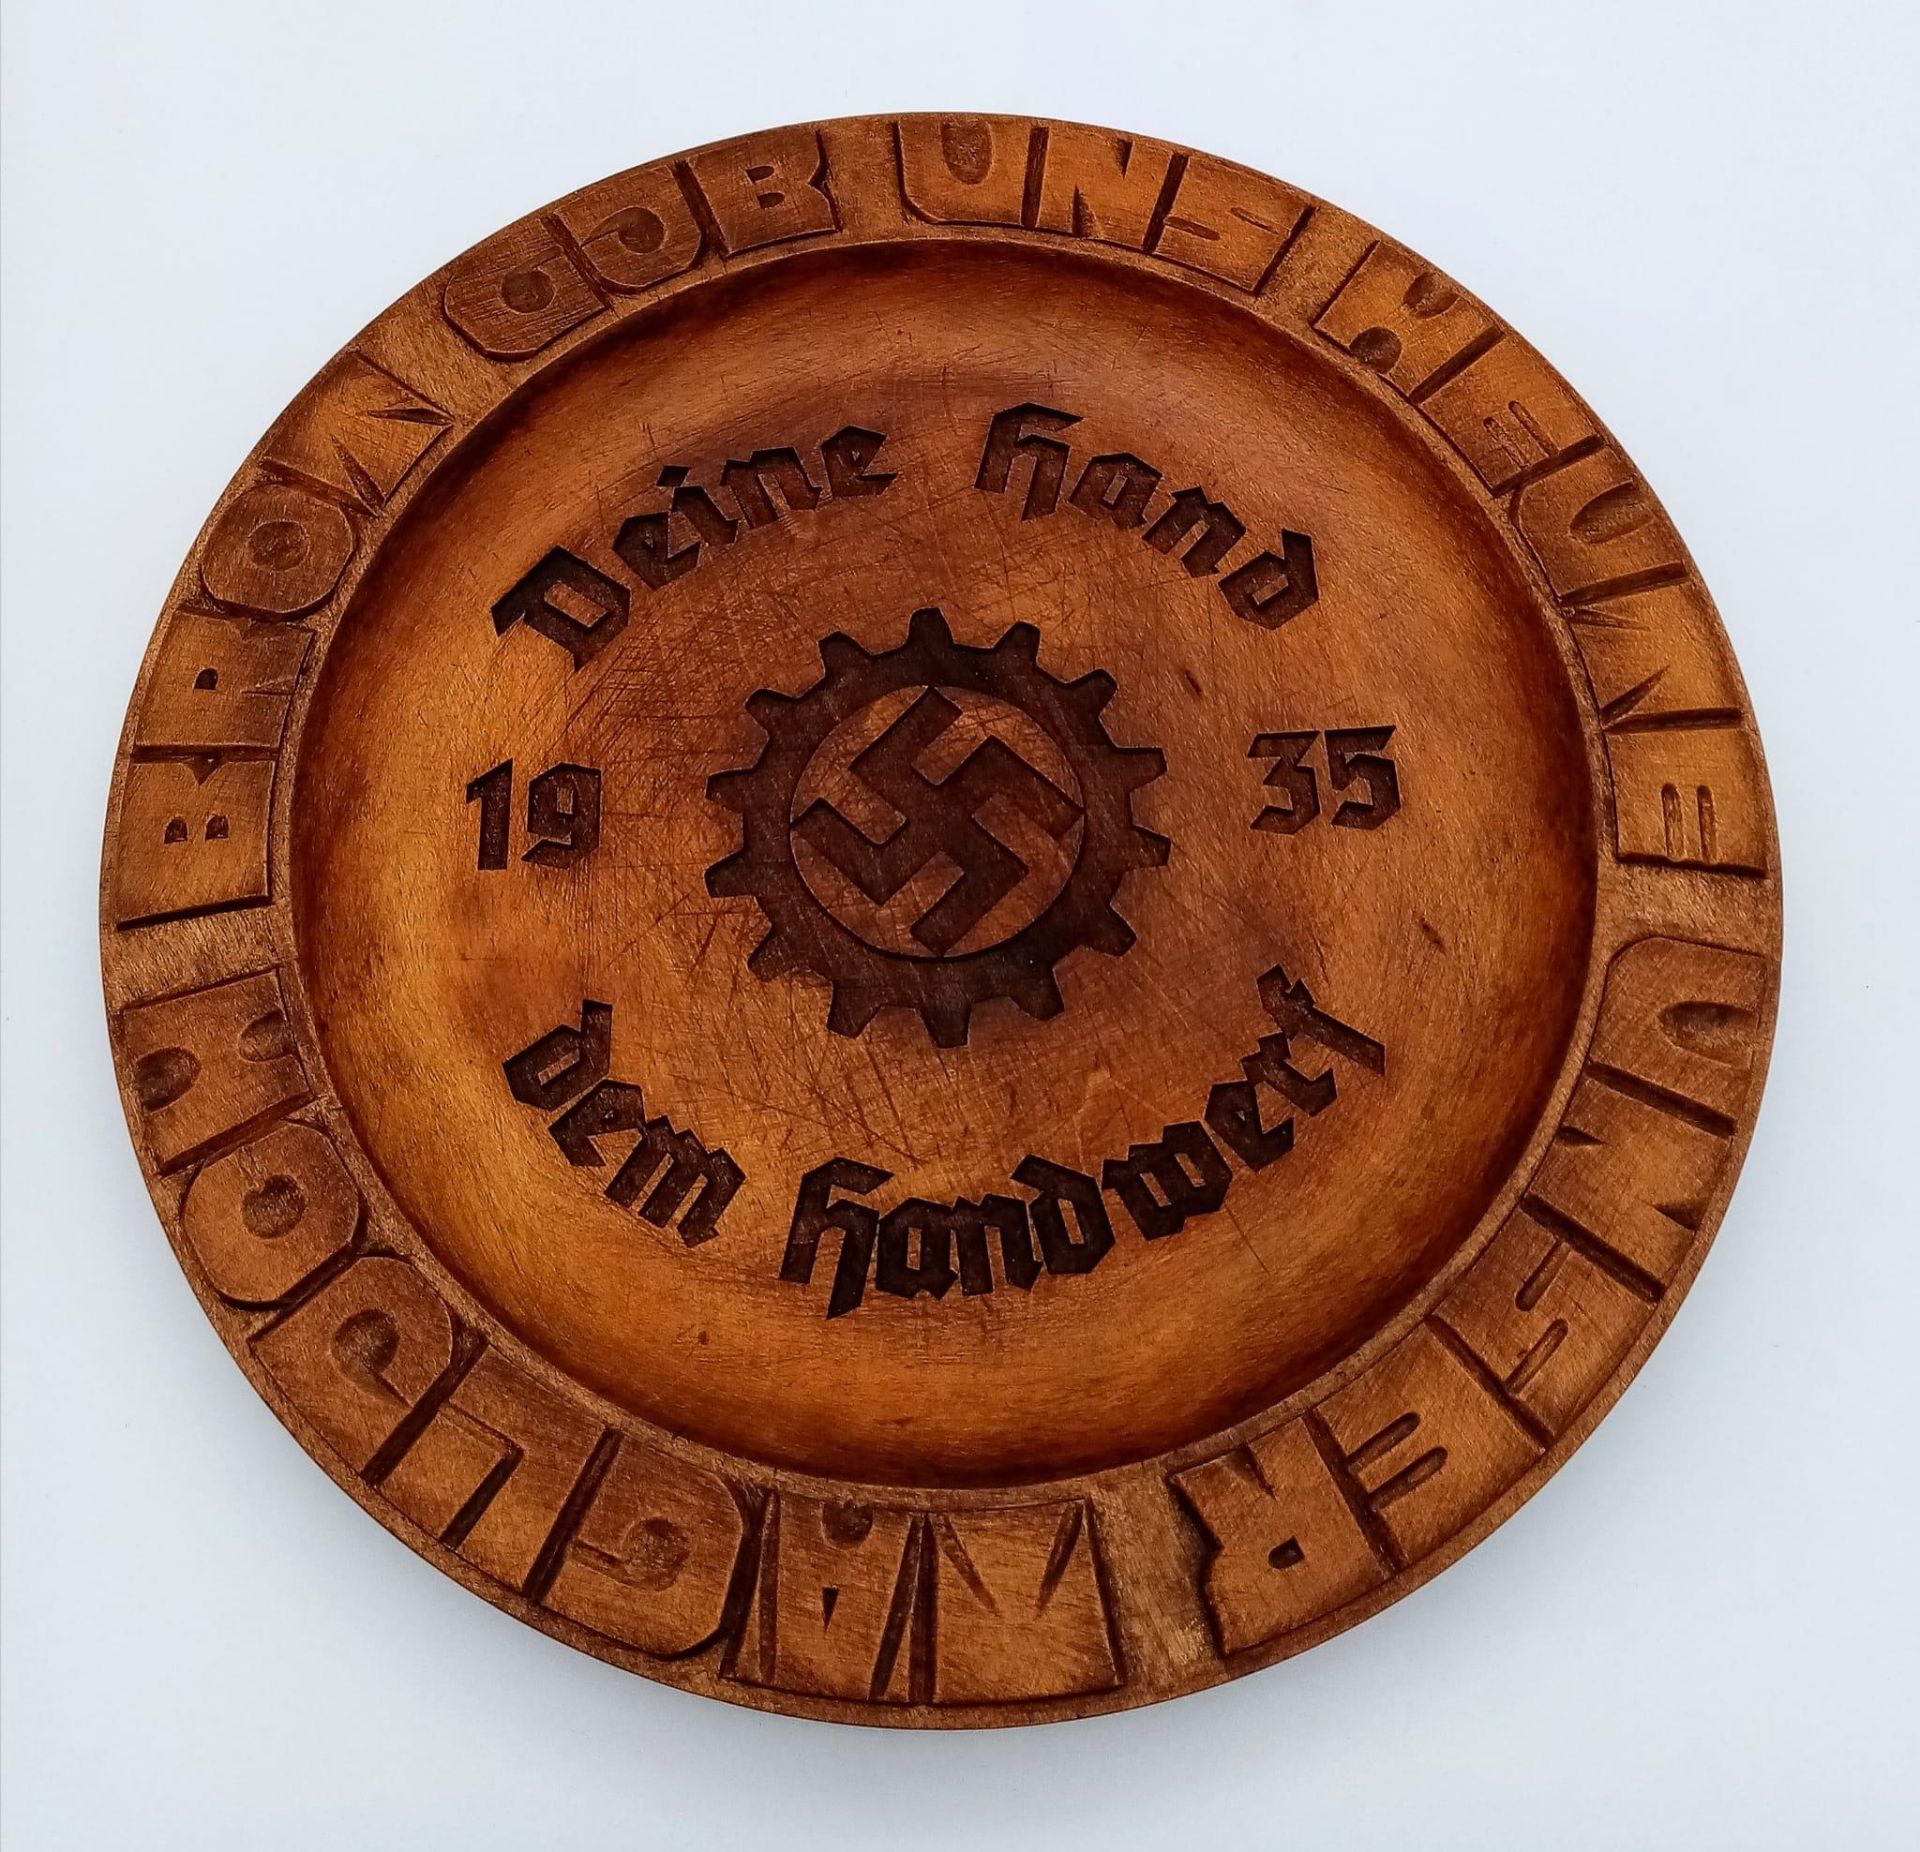 1935 Dated German RAD (labour corps) Bread Platter “Your Hand to the Craft”